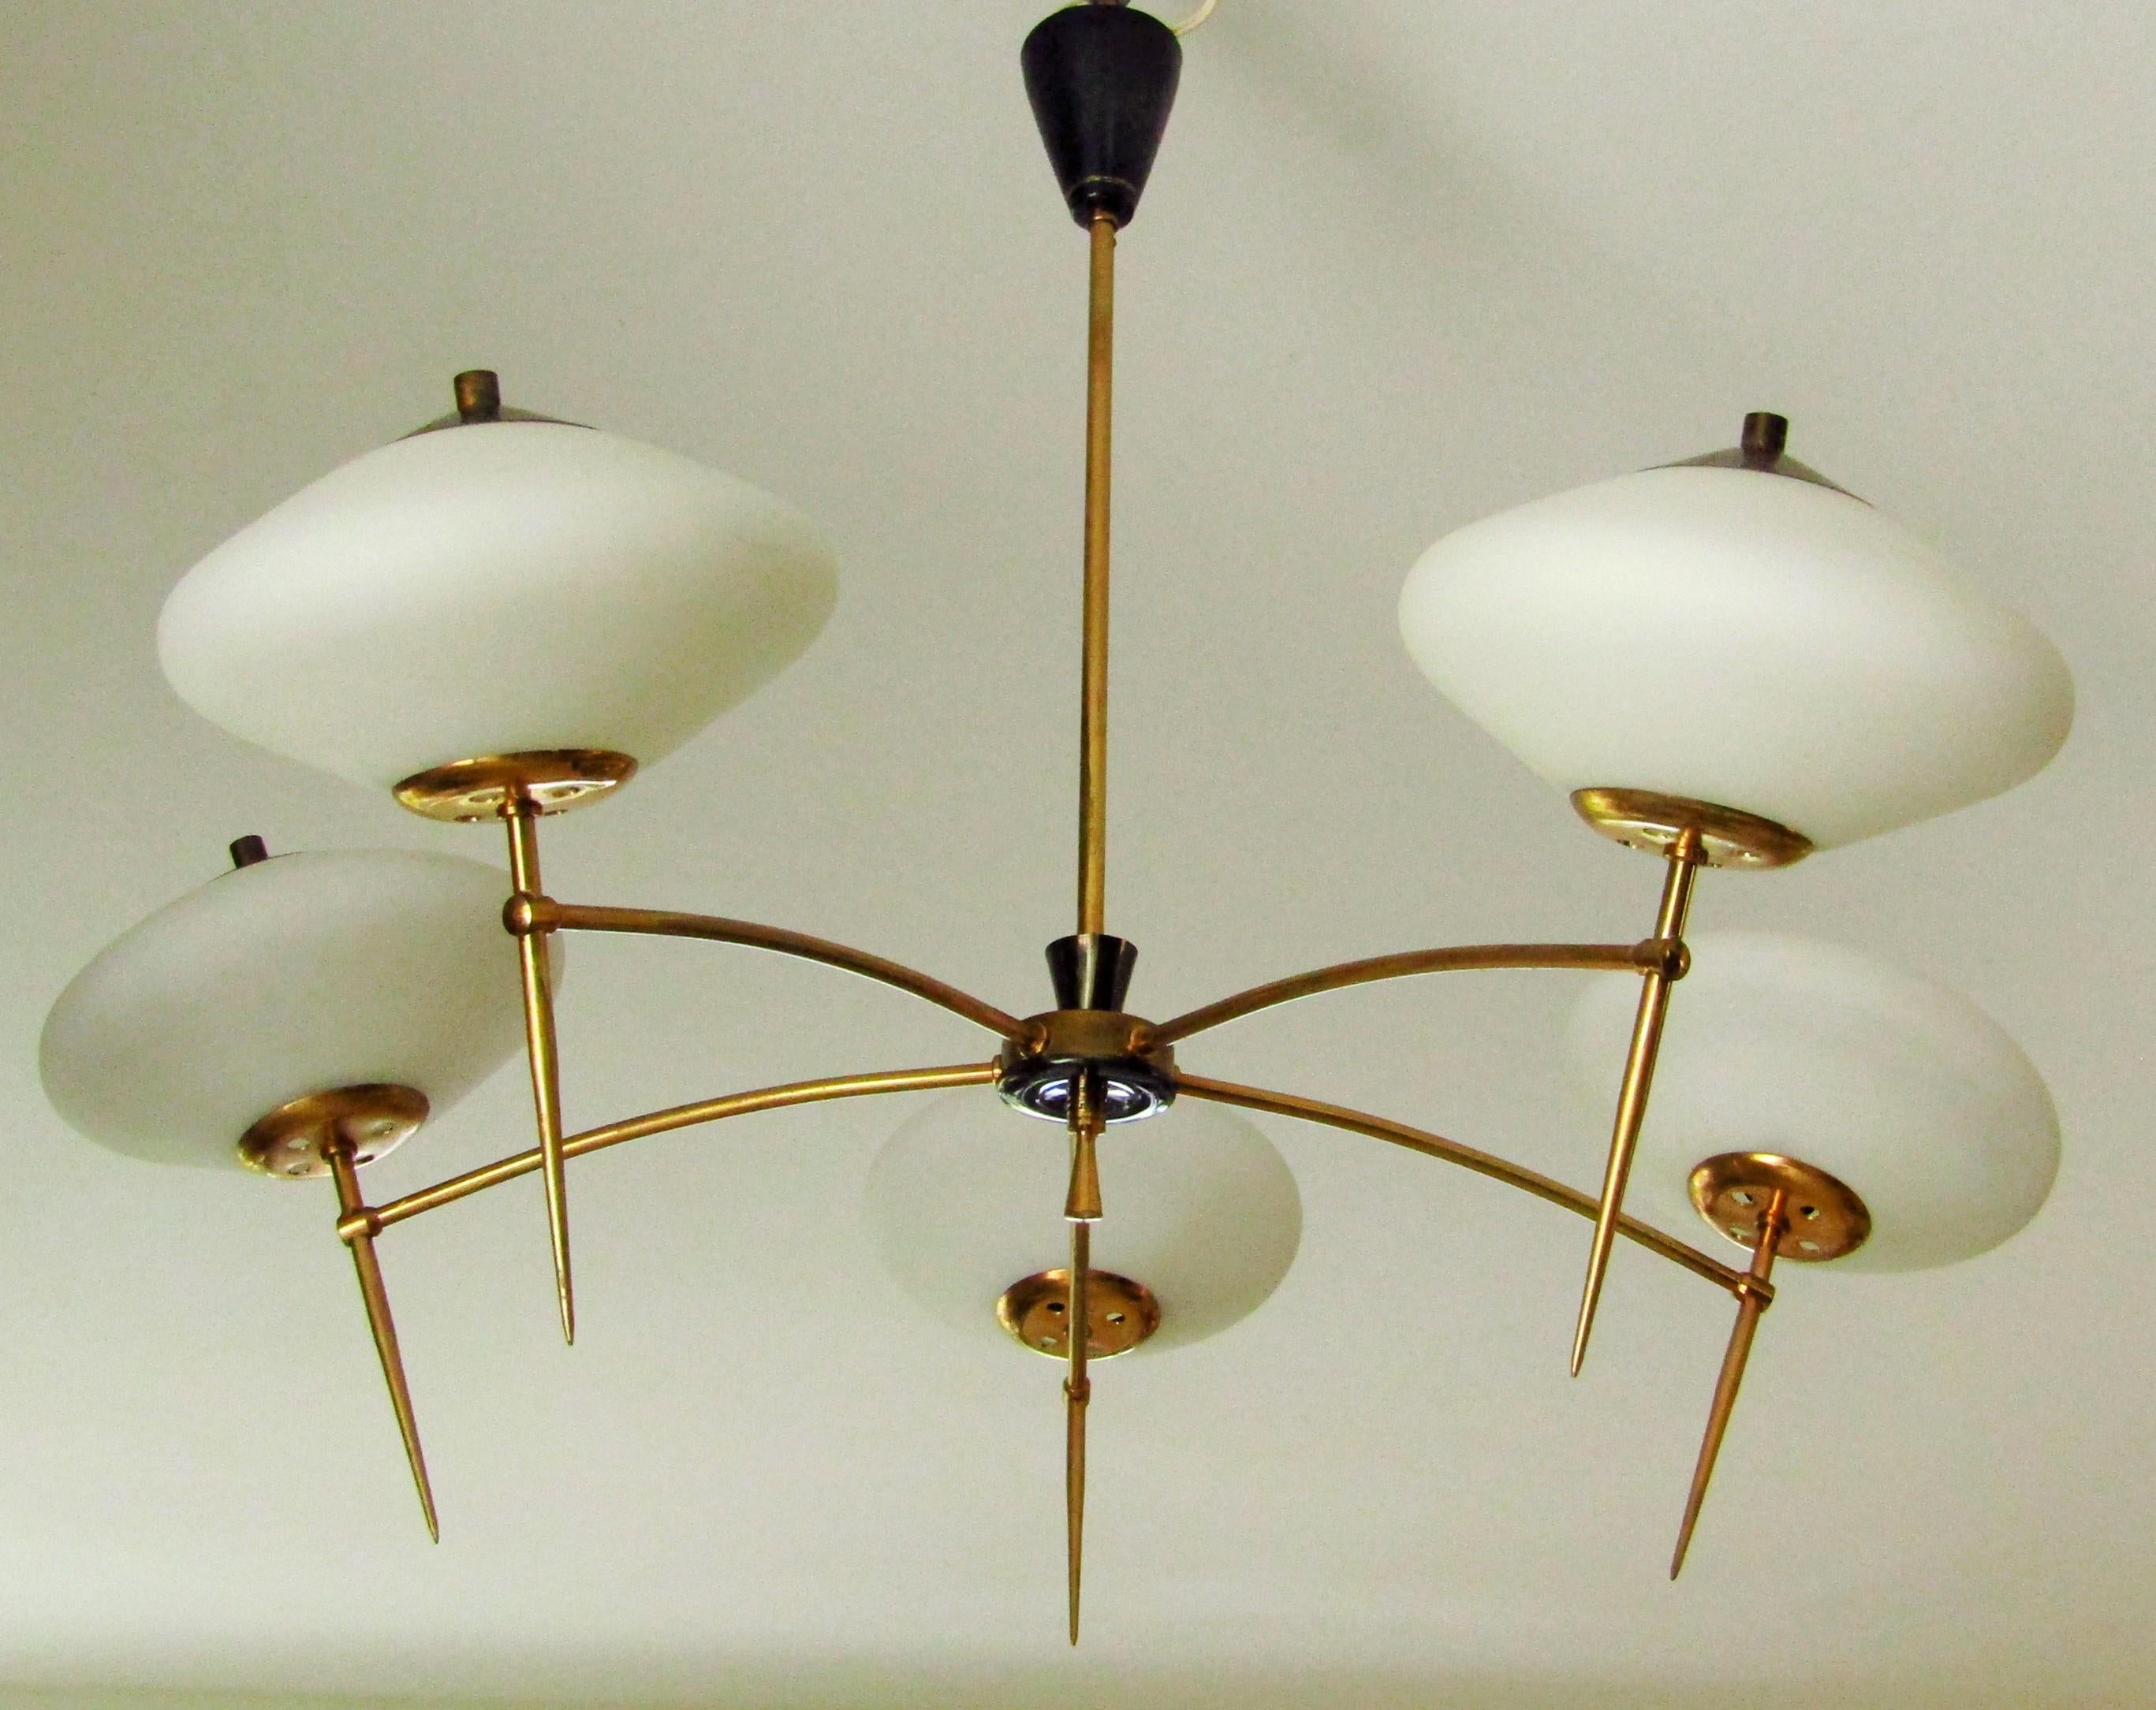 Midcentury chandelier Stilnovo, Italy 1950s. 5 glass shades, brass mount. Good vintage condition.

Free shipping anywhere in the world for this item!

 